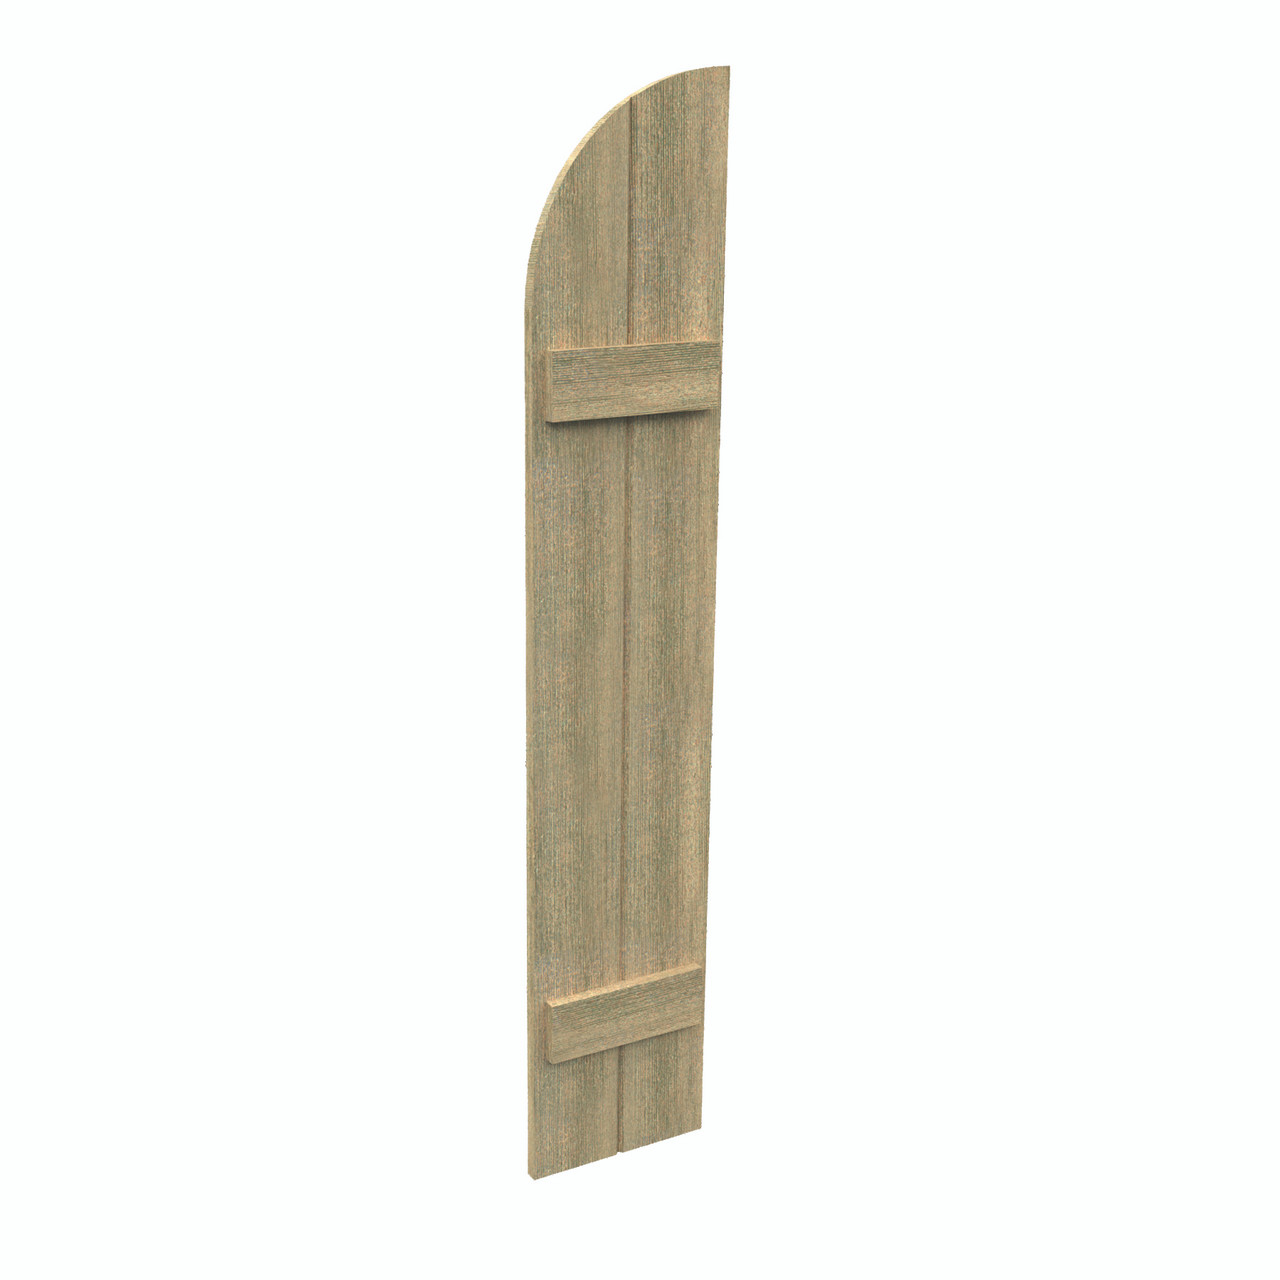 12 inch by 71 inch Quarter Round Shutter with 2-Boards